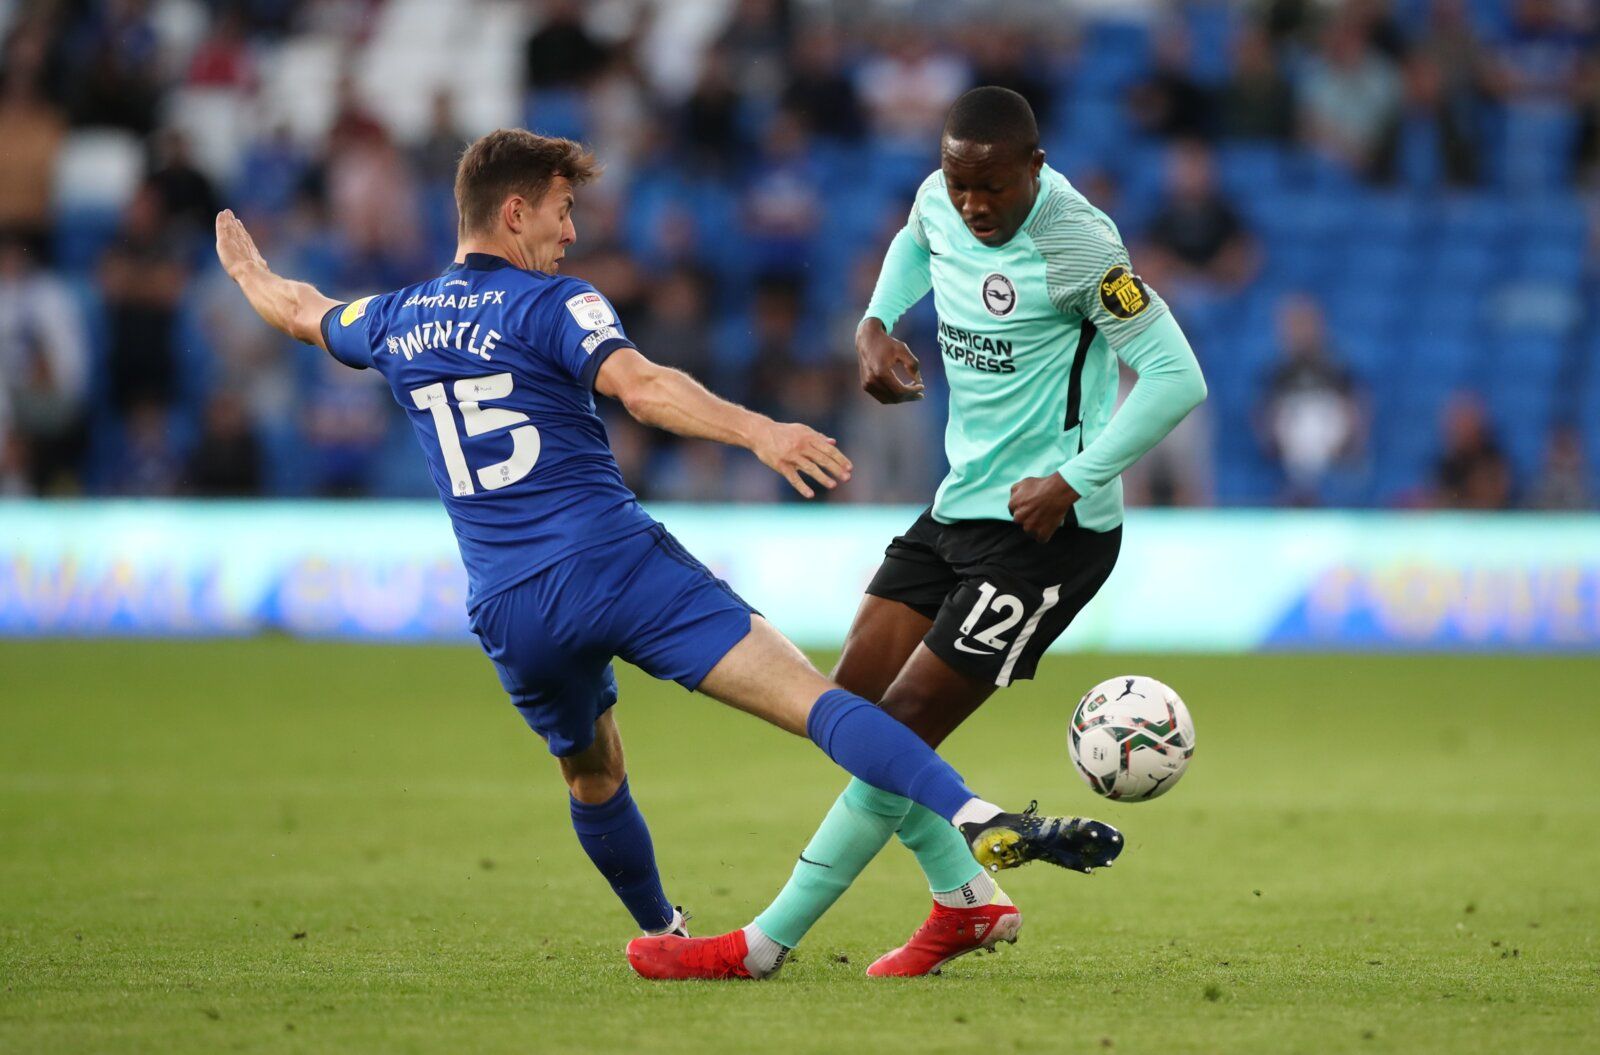 Soccer - England - Carabao Cup Second Round - Cardiff City v Brighton &amp; Hove Albion - Cardiff City Stadium, Cardiff, Britain - August 24, 2021 Brighton &amp; Hove Albion's Enock Mwepu in action with Cardiff City's Ryan Wintle Action Images via Reuters/Peter Cziborra